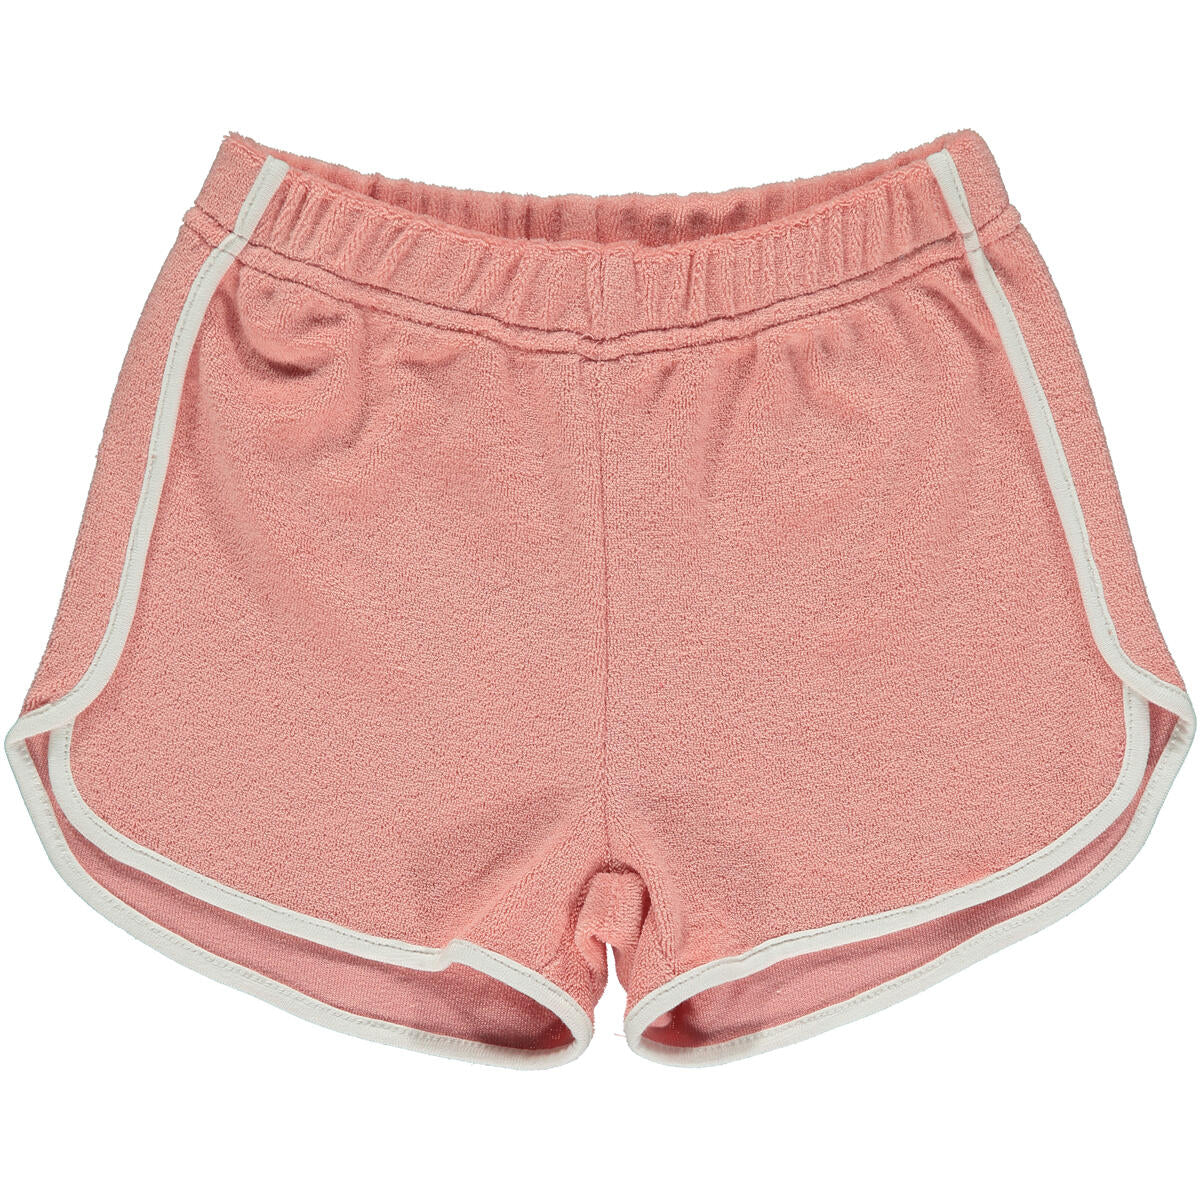 Indy Shorts- Pink